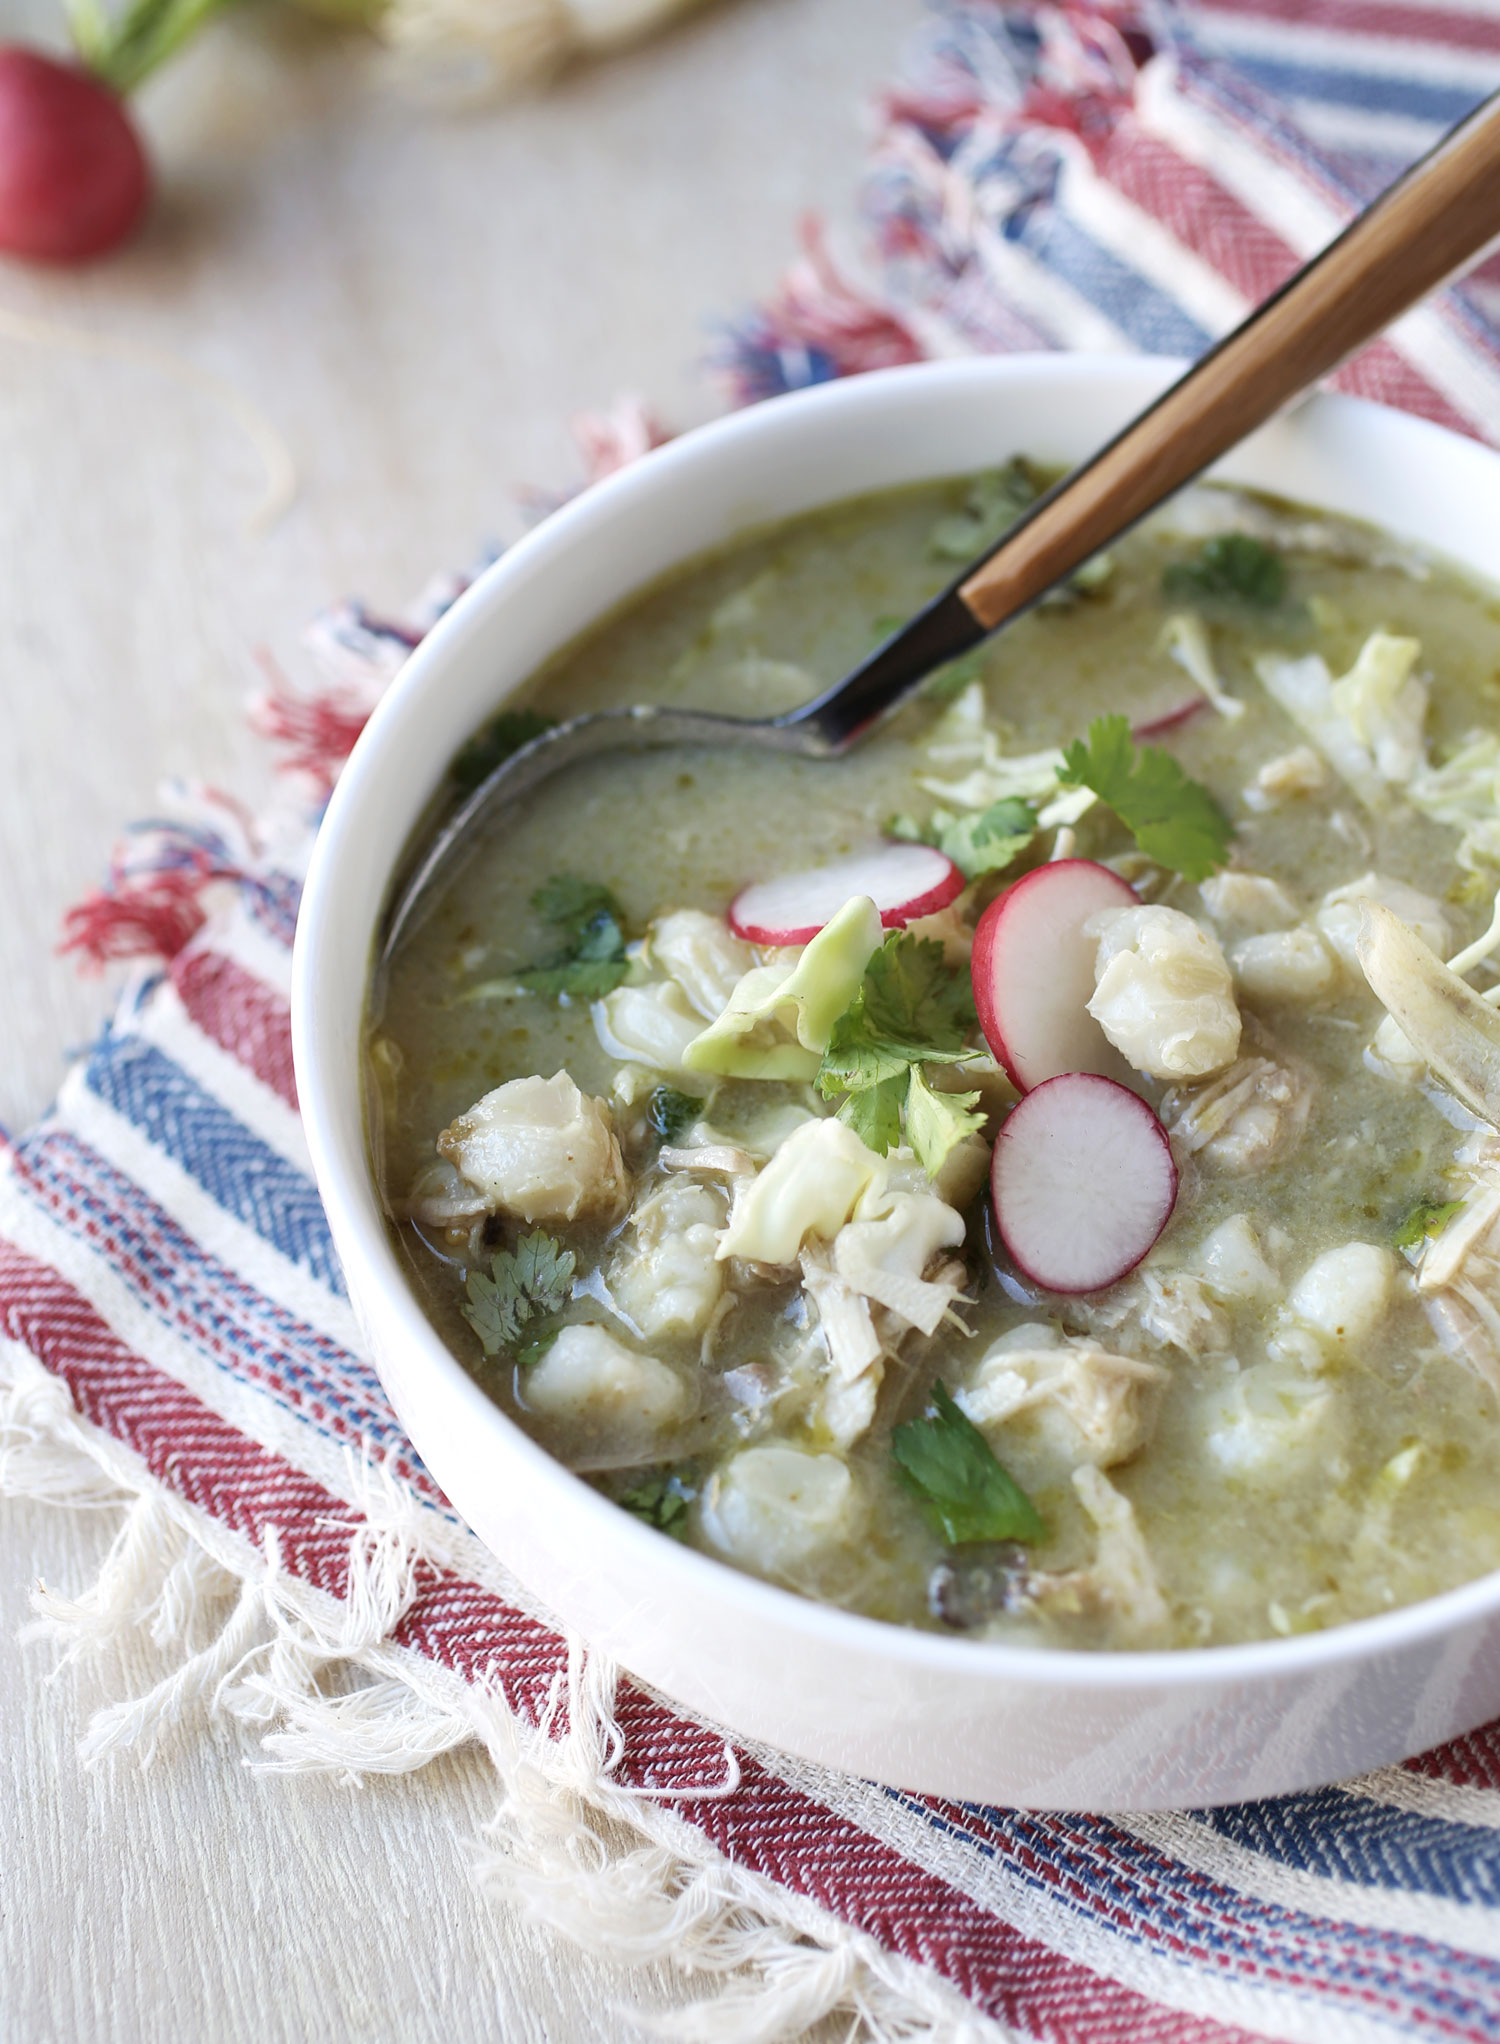 warm up your winter dinner routine with this authentic mexican pozole recipe via @citysage